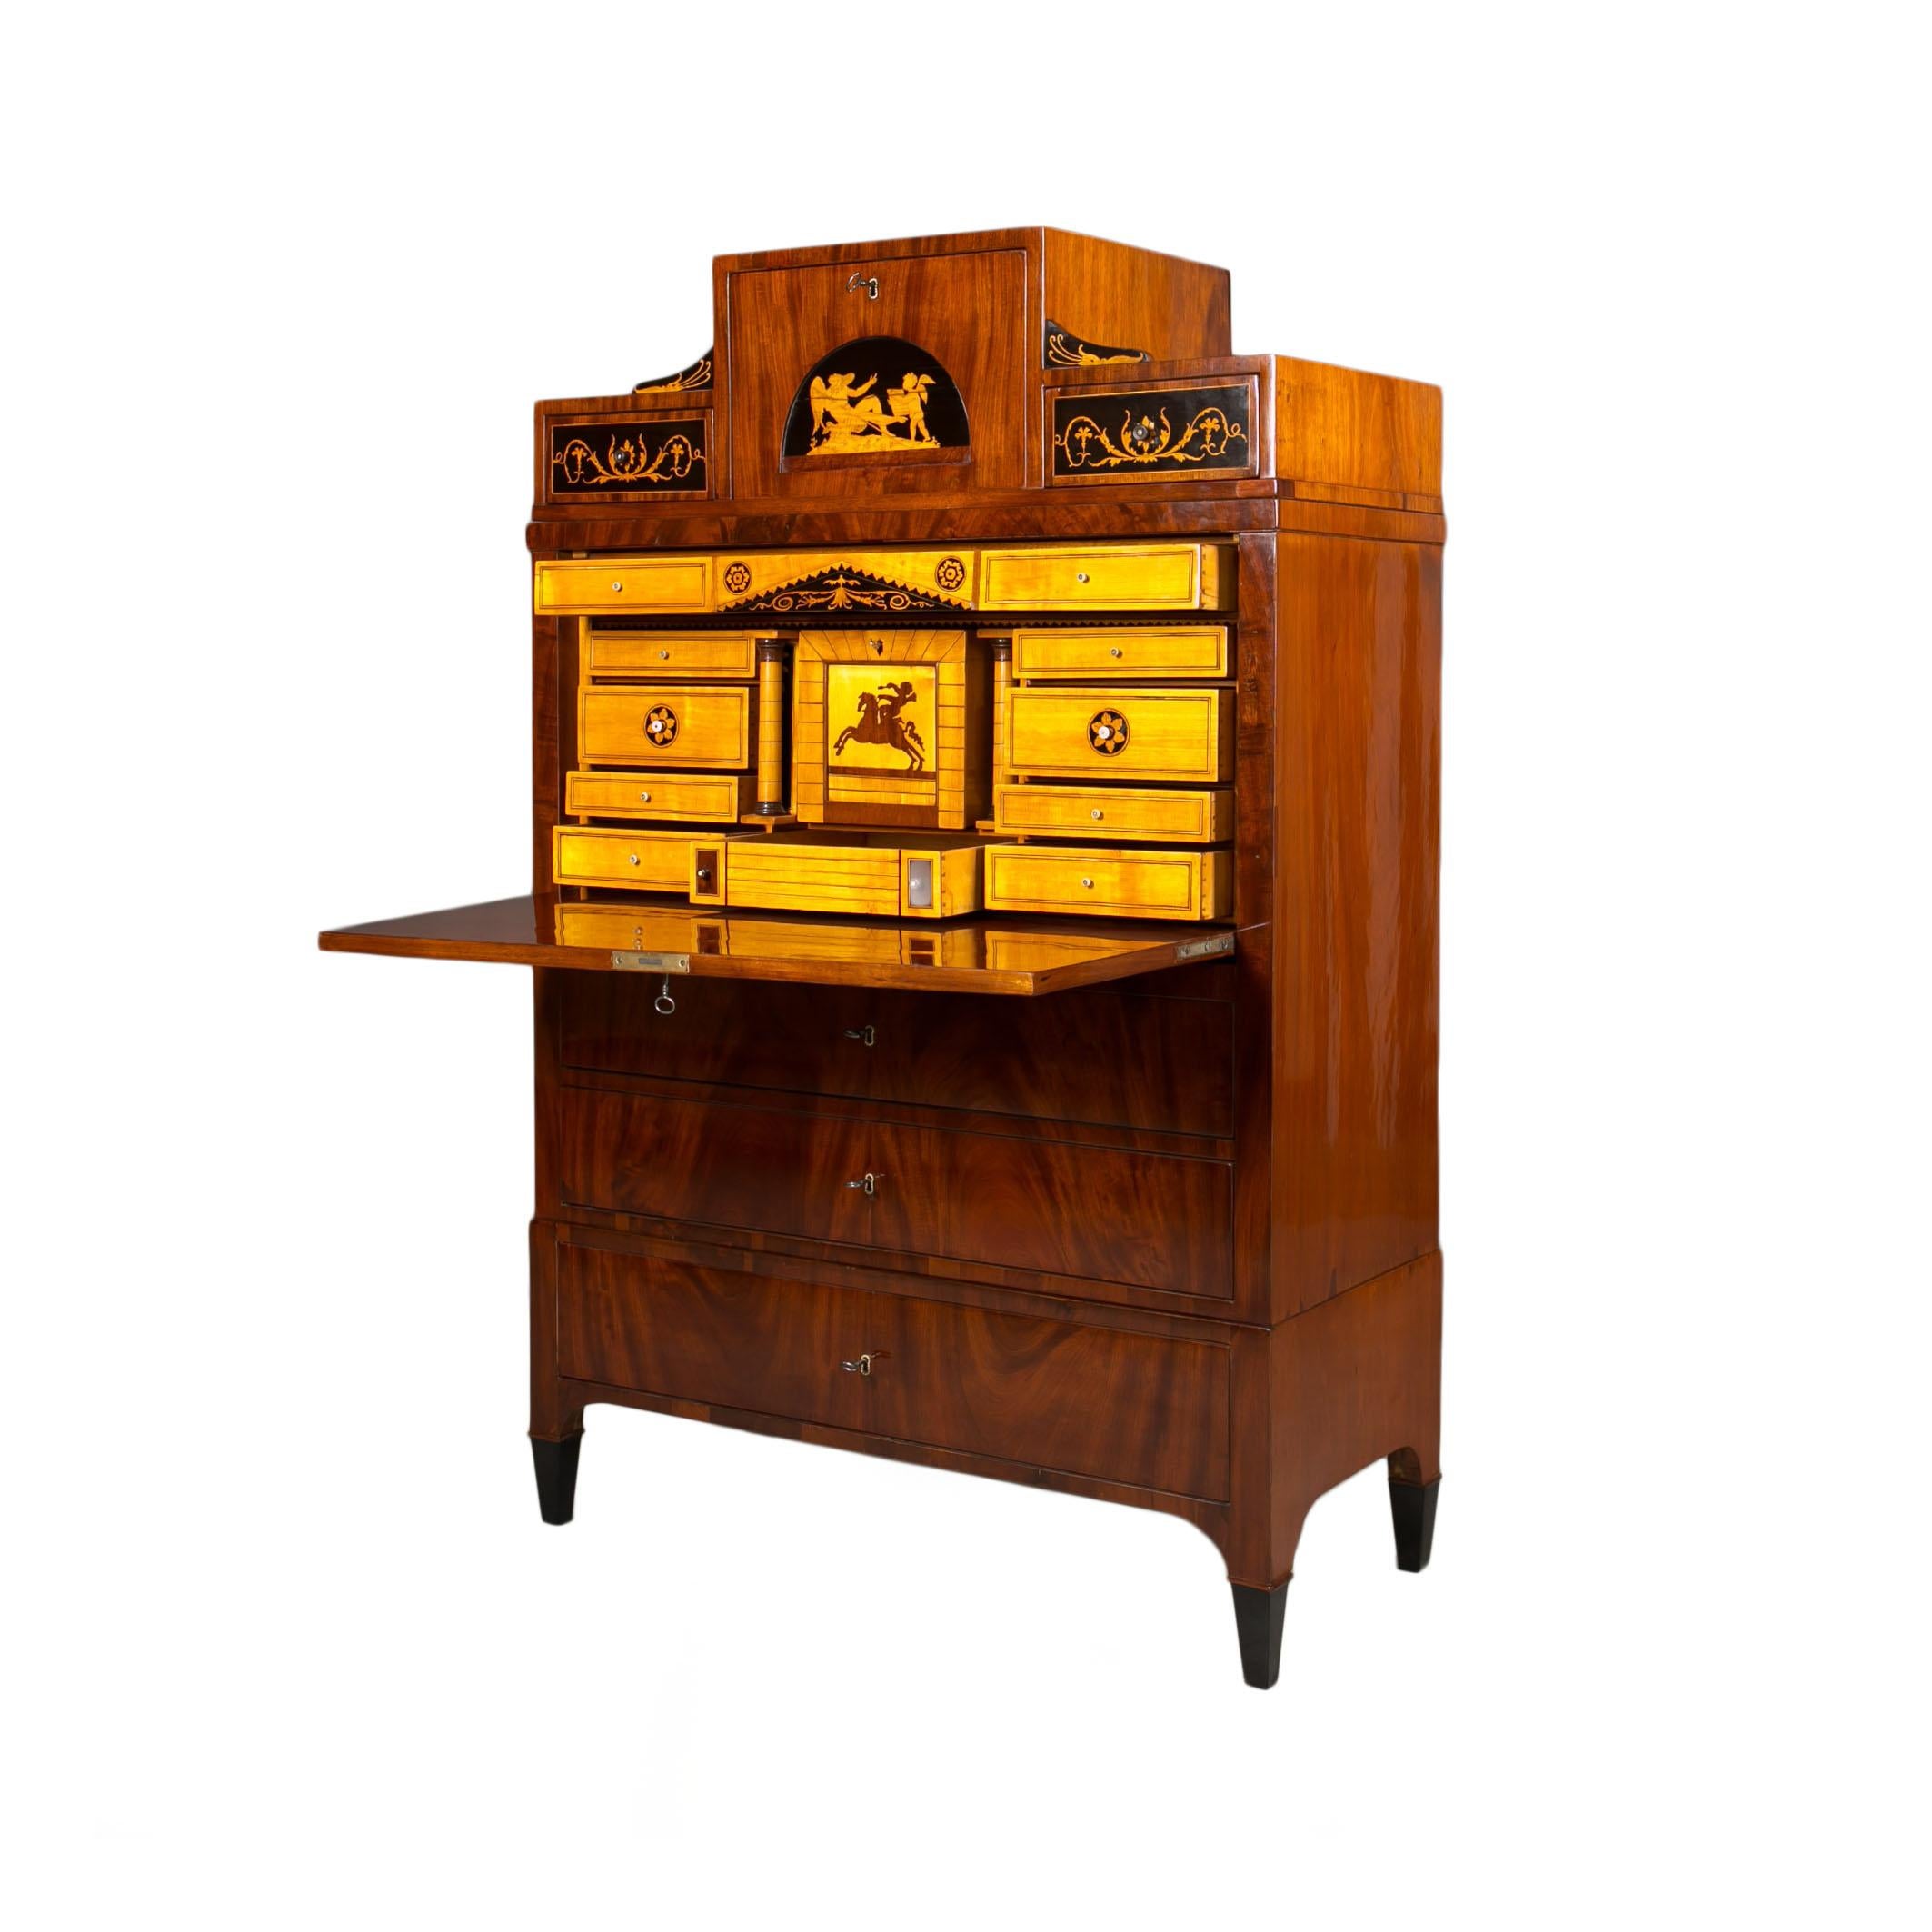 This beautiful Secretary comes from Austria and was made in 19th century. The piece is made of oak wood, veneered with mahogany veneer. When opening the main section the doors transform into a writing desktop revealing a section with multiple small